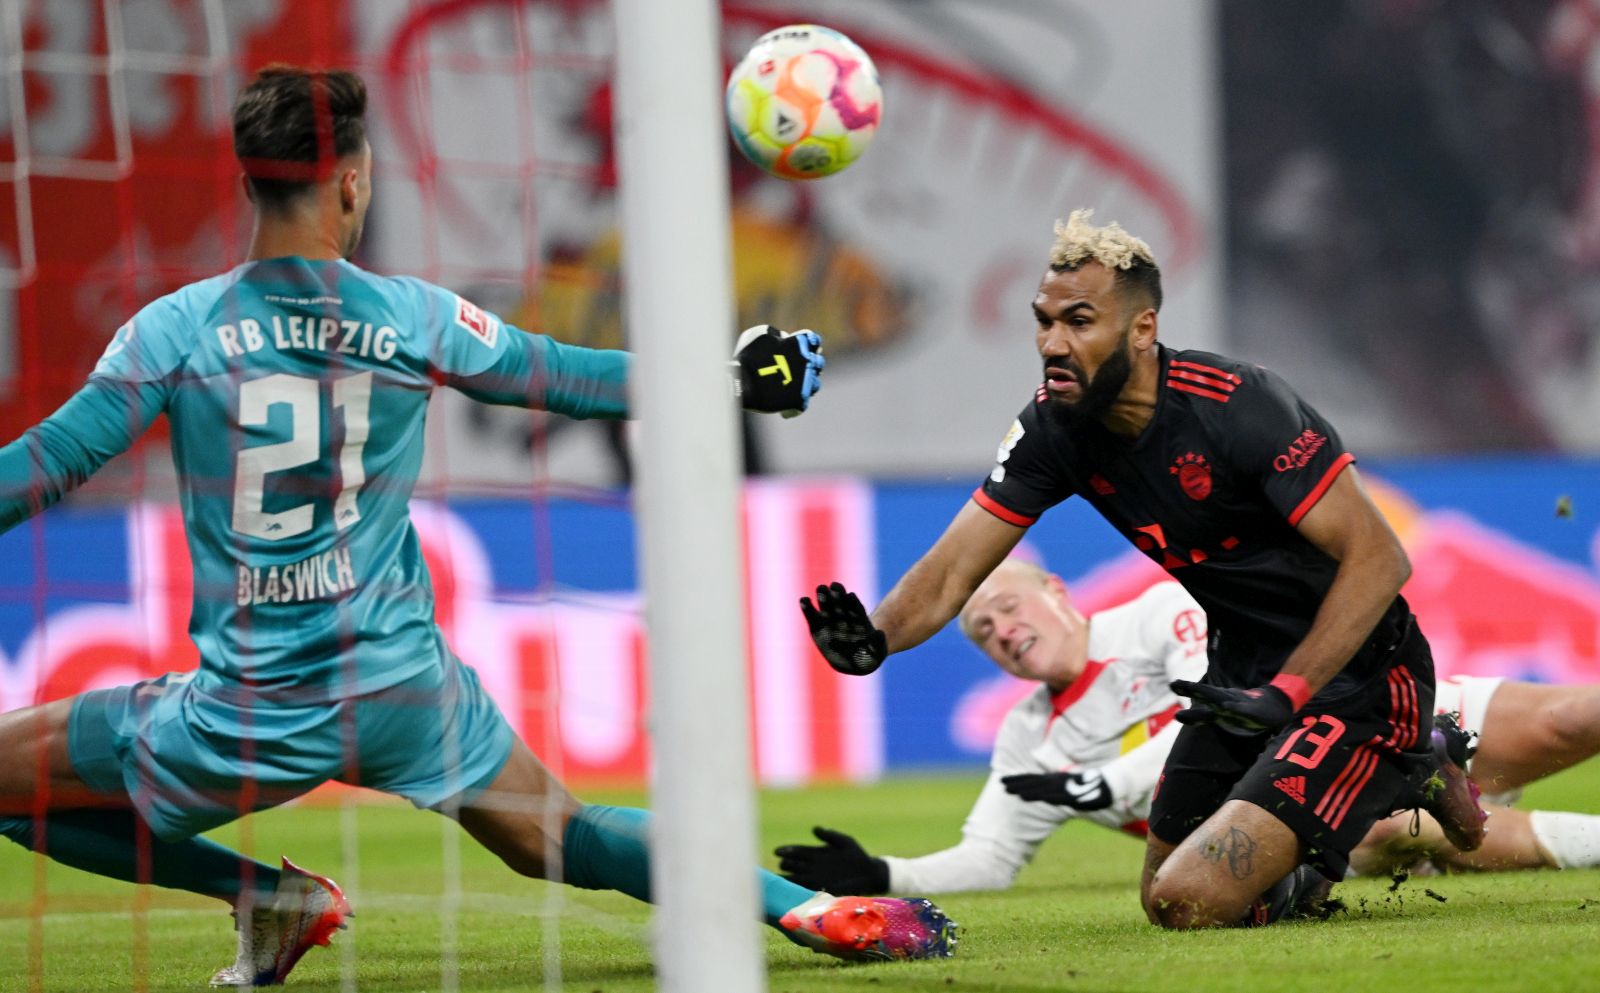 epa10418907 Munich's Eric Maxim Choupo-Moting (R) scores the 1-0 lead against Leipzig's goalkeeper Janis Blaswich (L) during the German Bundesliga soccer match between RB Leipzig and FC Bayern Munich in Leipzig, Germany, 20 January 2023.  EPA/FILIP SINGER (ATTENTION: The DFL regulations prohibit any use of photographs as image sequences and/or quasi-video.)